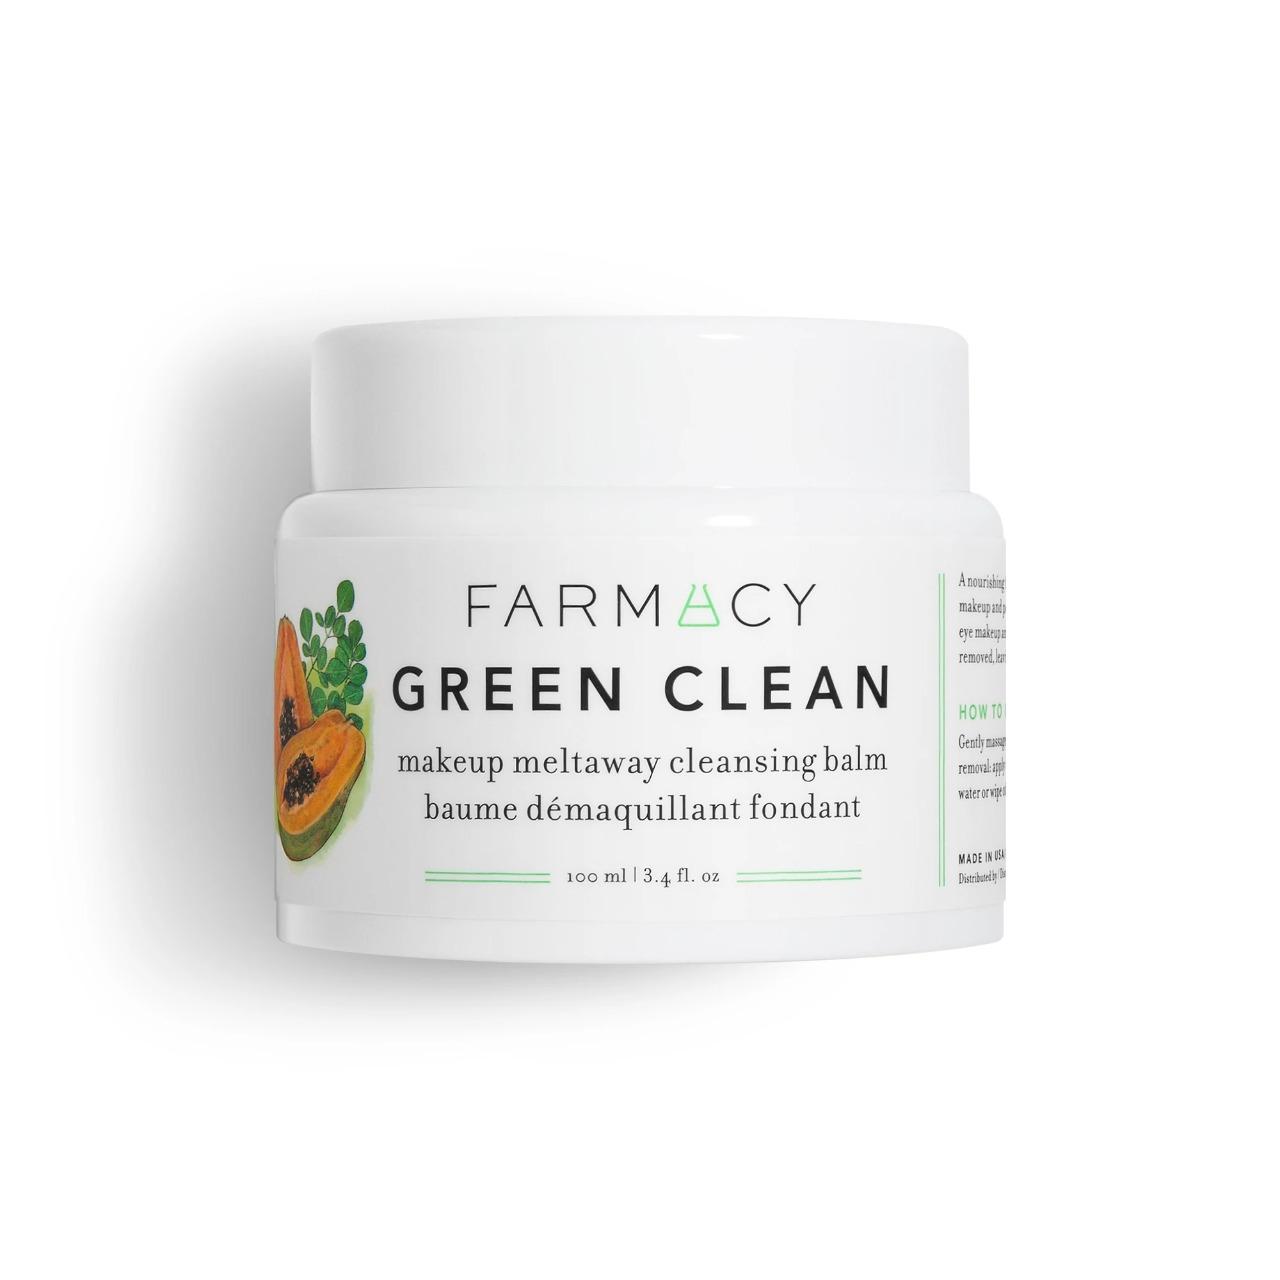 FARMACY - Green Clean Makeup Removing Cleansing Balm - 100ml (GG)